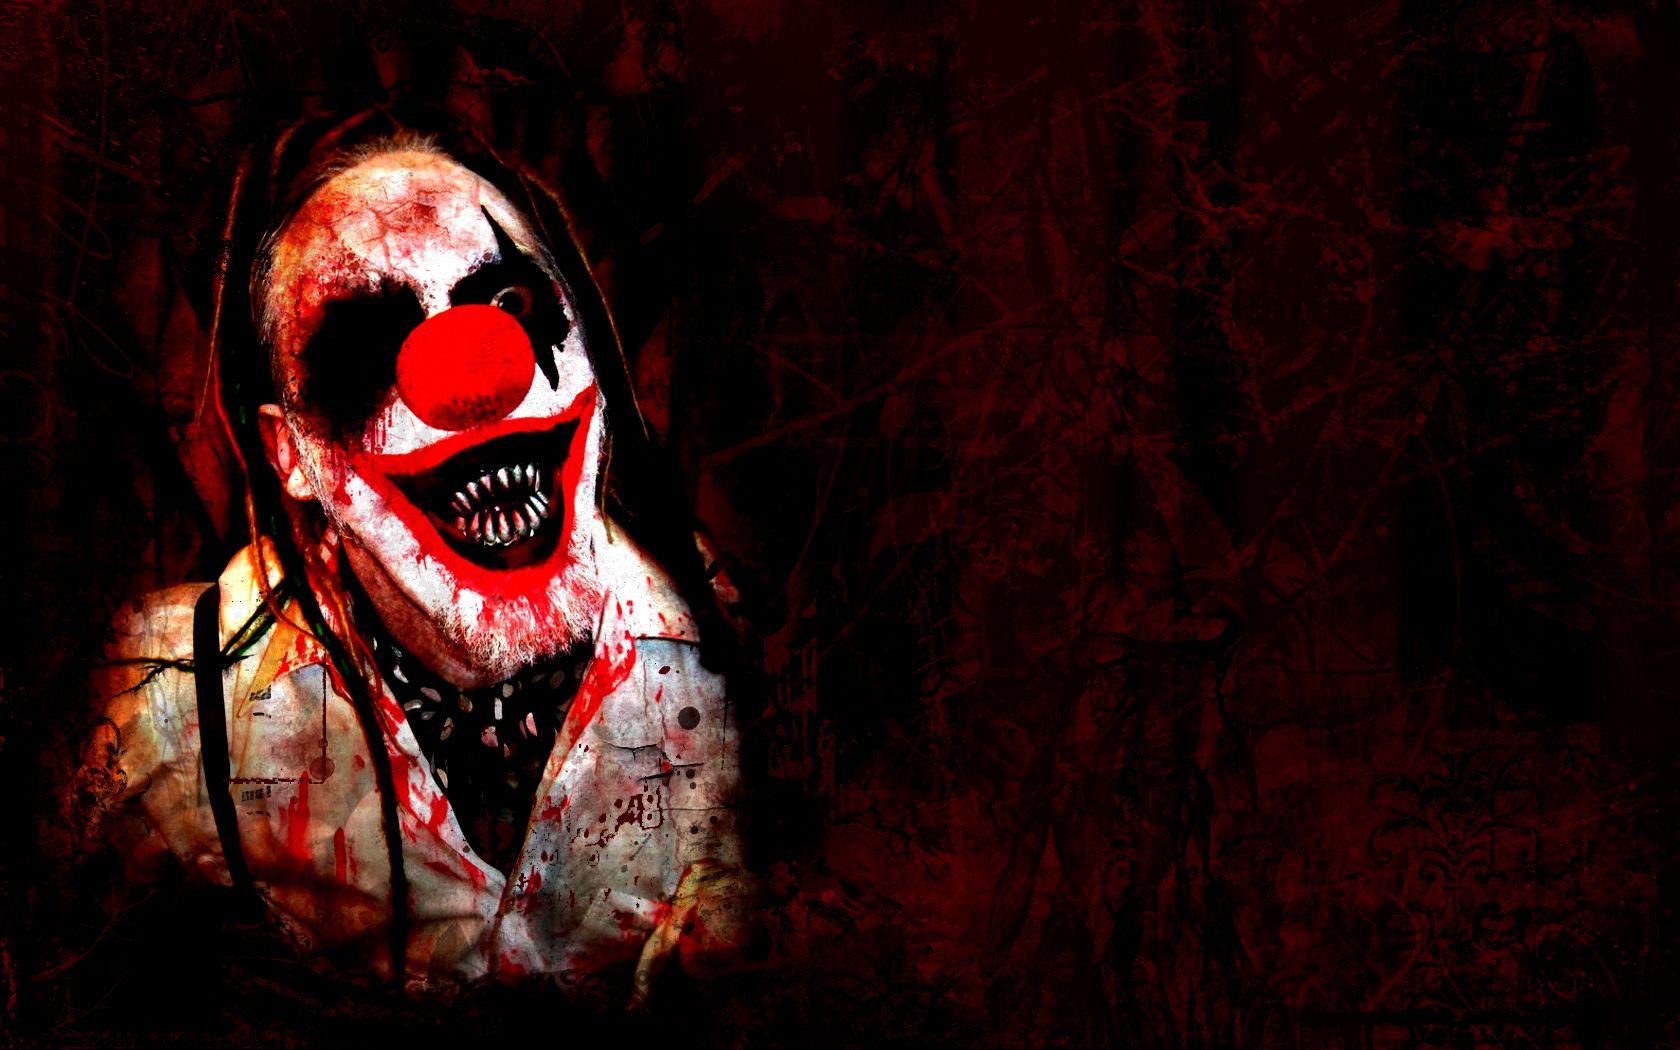 Scary Clown Wallpaper Desktop Background Pic. Clowning Around